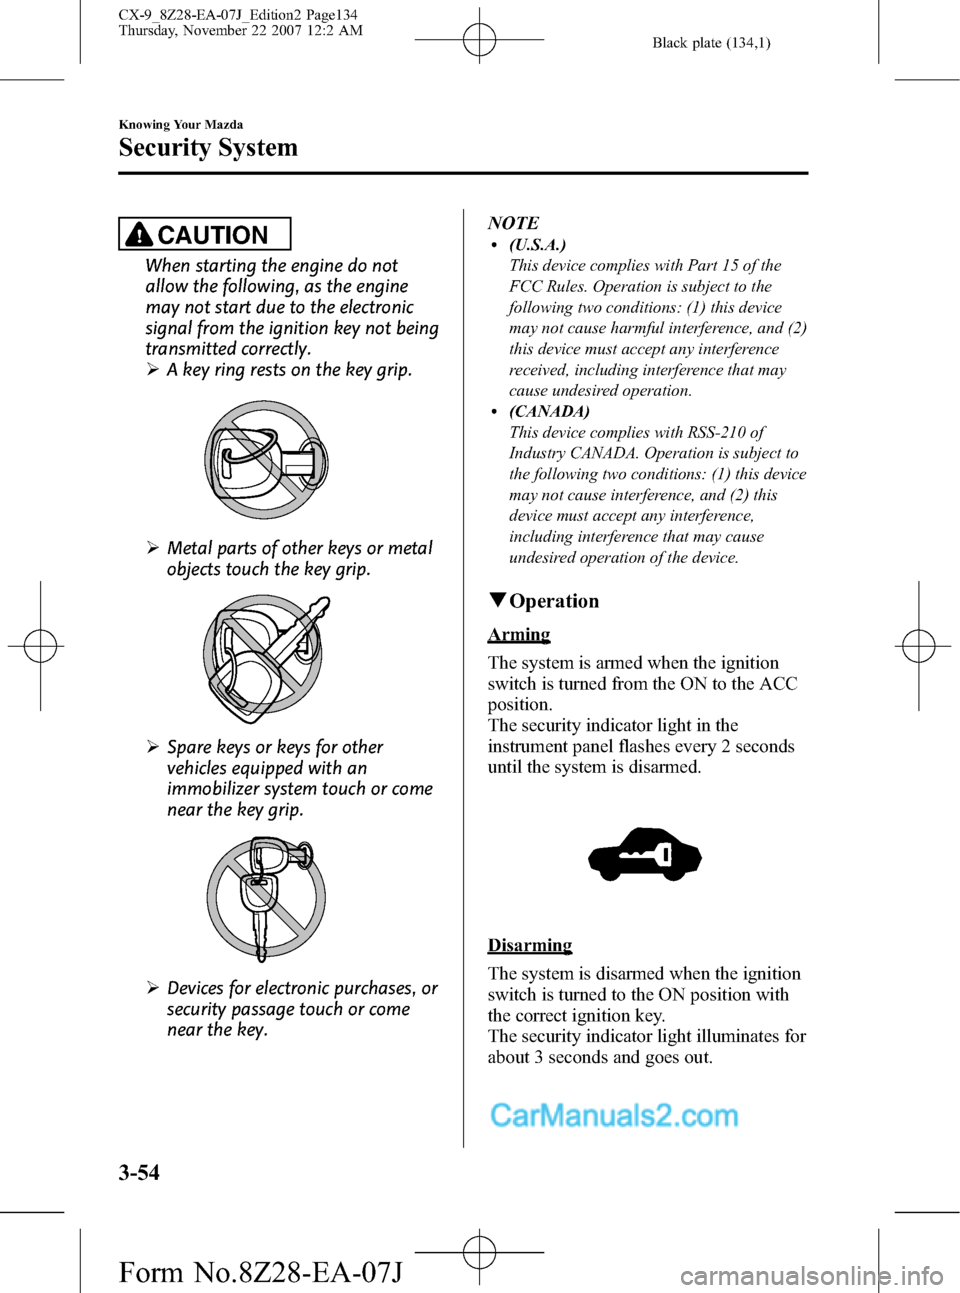 MAZDA MODEL CX-9 2008  Owners Manual (in English) Black plate (134,1)
CAUTION
When starting the engine do not
allow the following, as the engine
may not start due to the electronic
signal from the ignition key not being
transmitted correctly.
ØA key